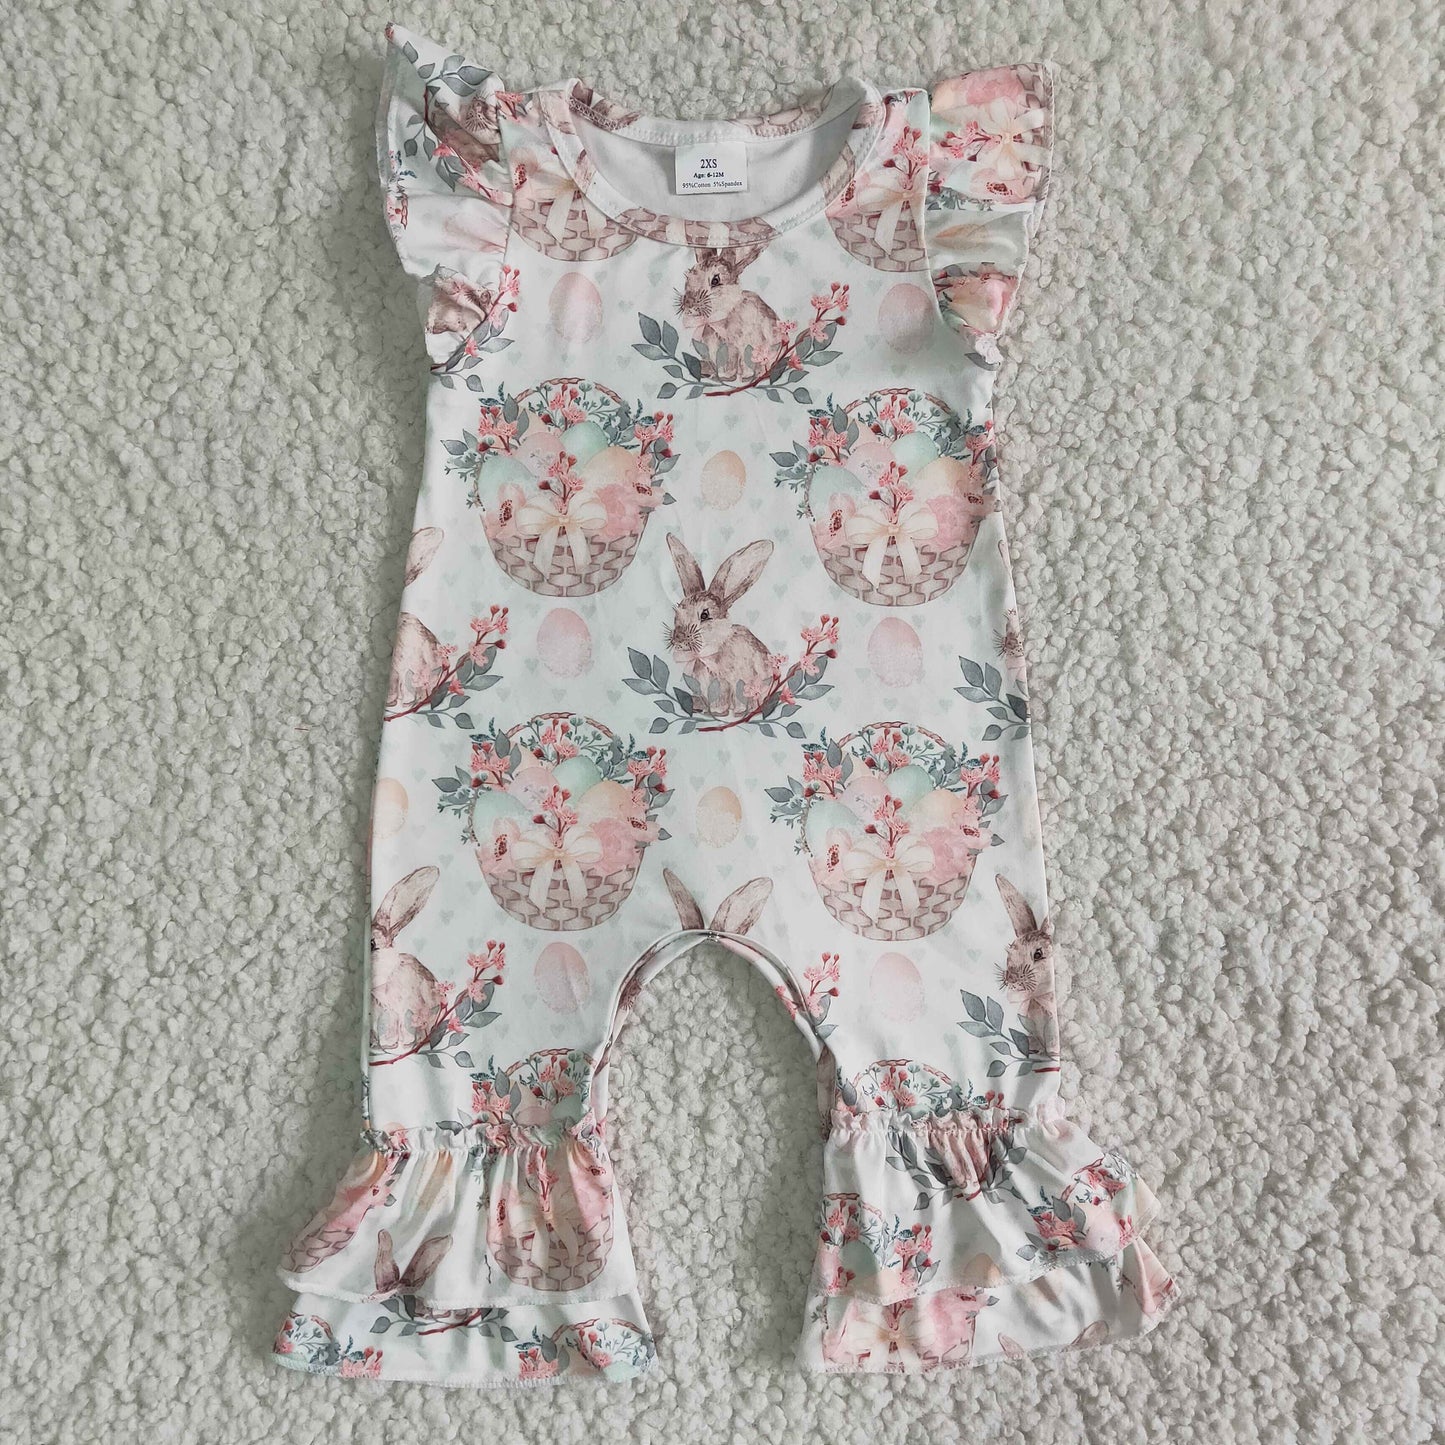 Clearance B6-27 Easter Rabbits Pink Girls Short Sleeve Romper